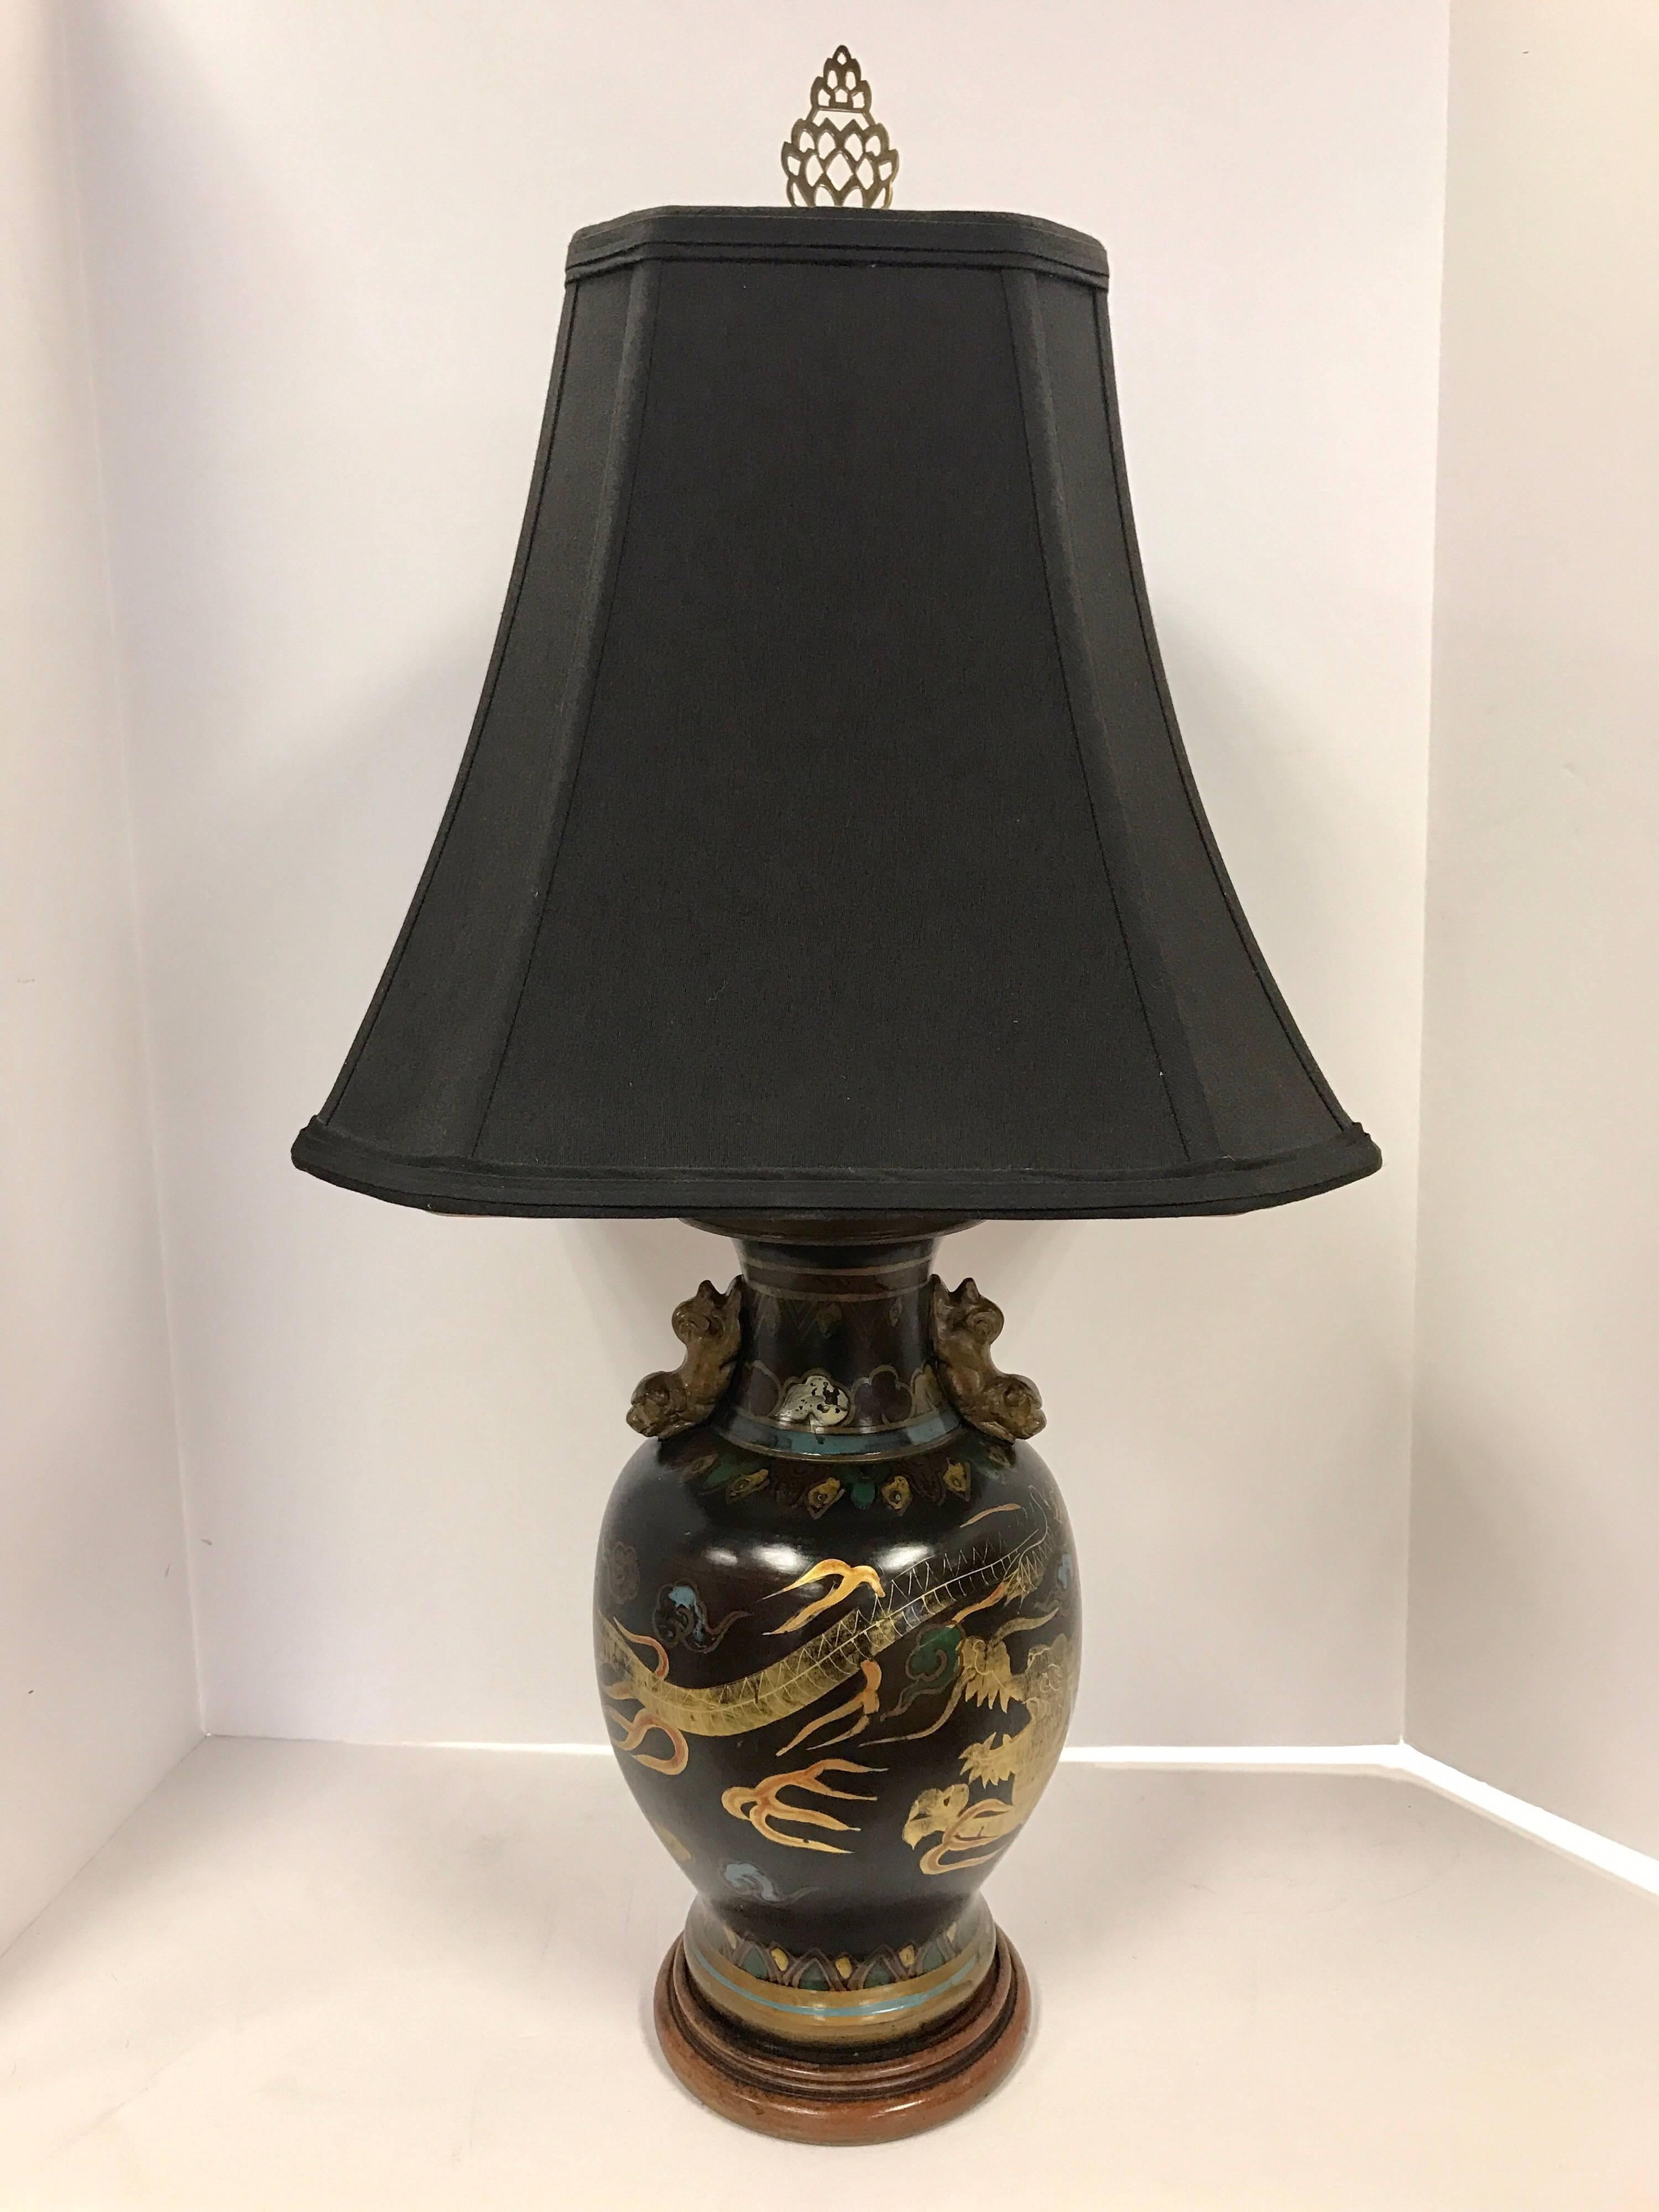 Elegant hand-painted Chinese porcelain dragon lamp with foo dogs at handles. Shade measures 14